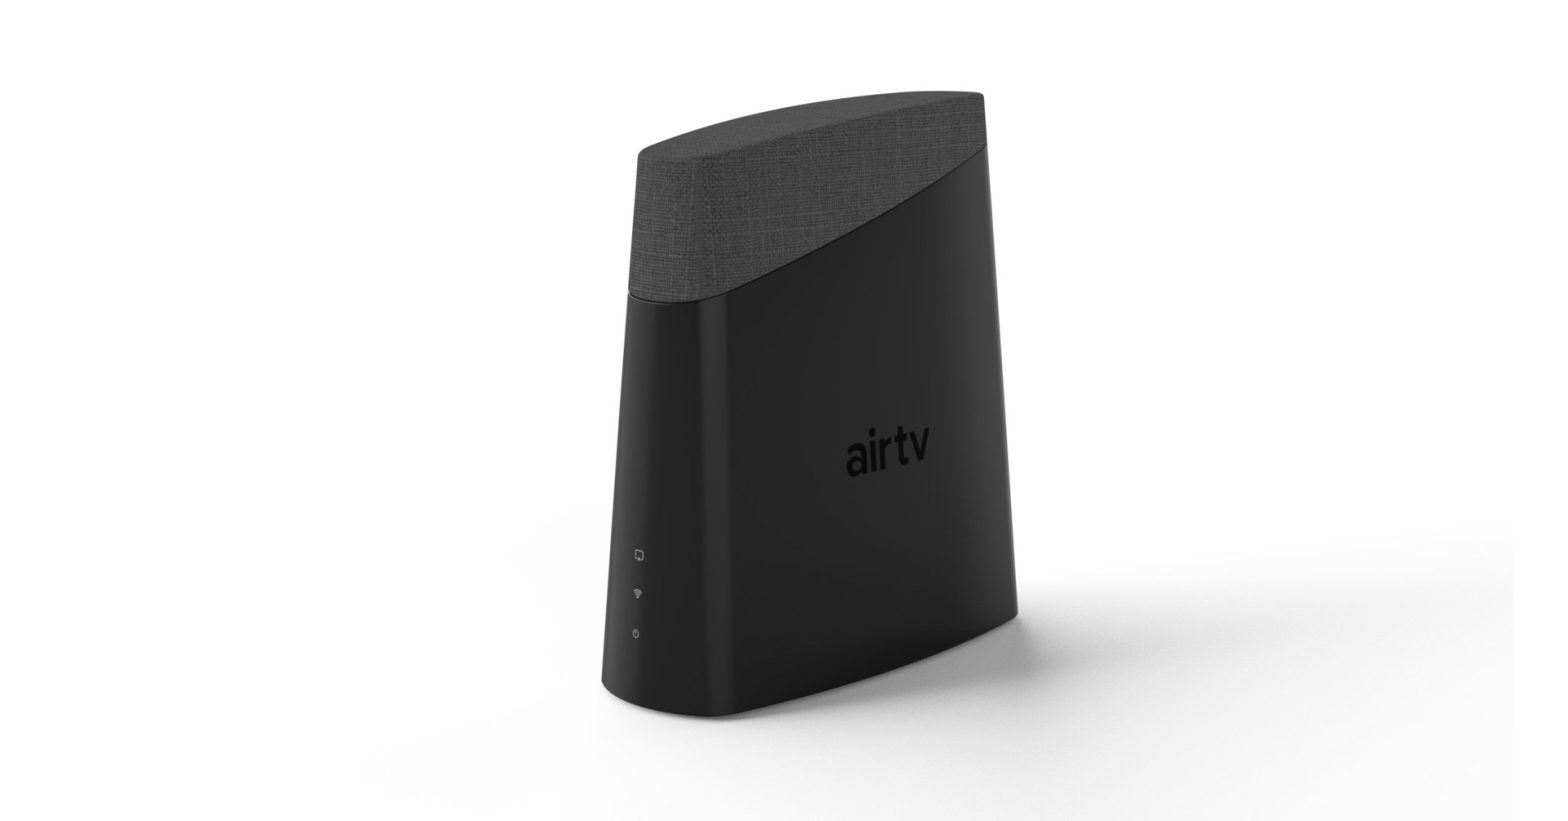 air tv Anywhewre Wi-Fi Enabled Network DVR and Streaming Device User Guide